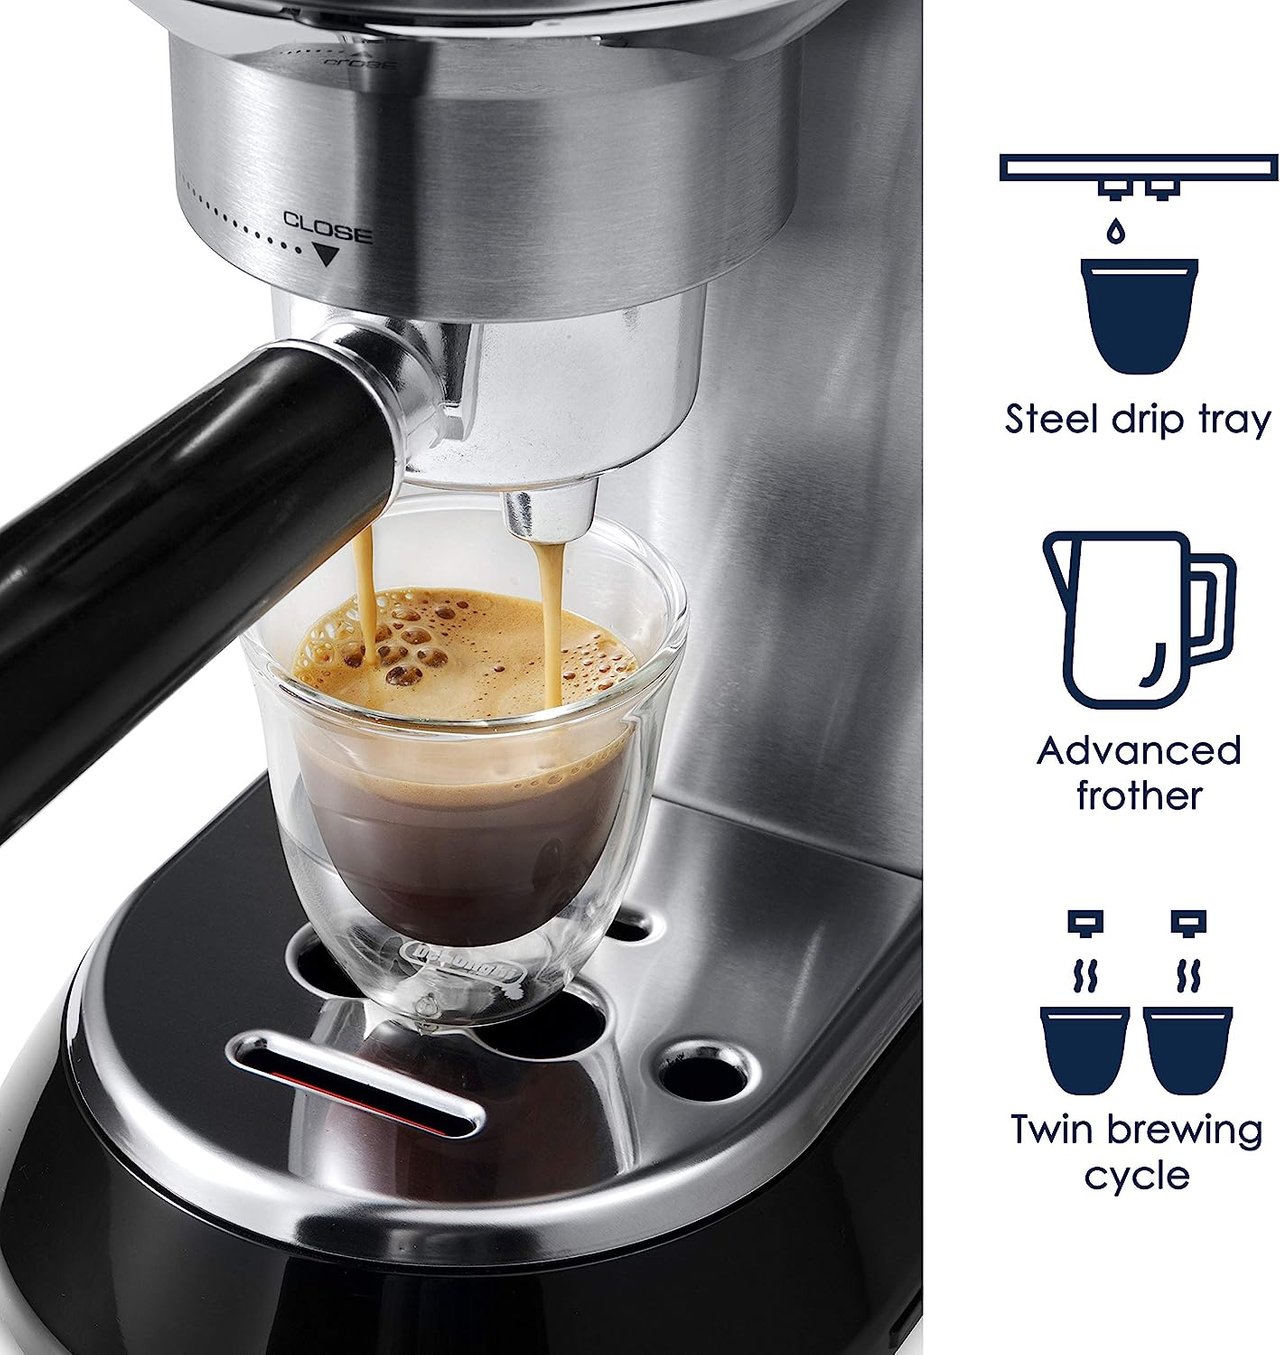 3 The De'Longhi EC680 Slim Stainless Steel Espresso and Cappuccino Machine with 15 Bar Pressure and Advanced Cappuccino System.